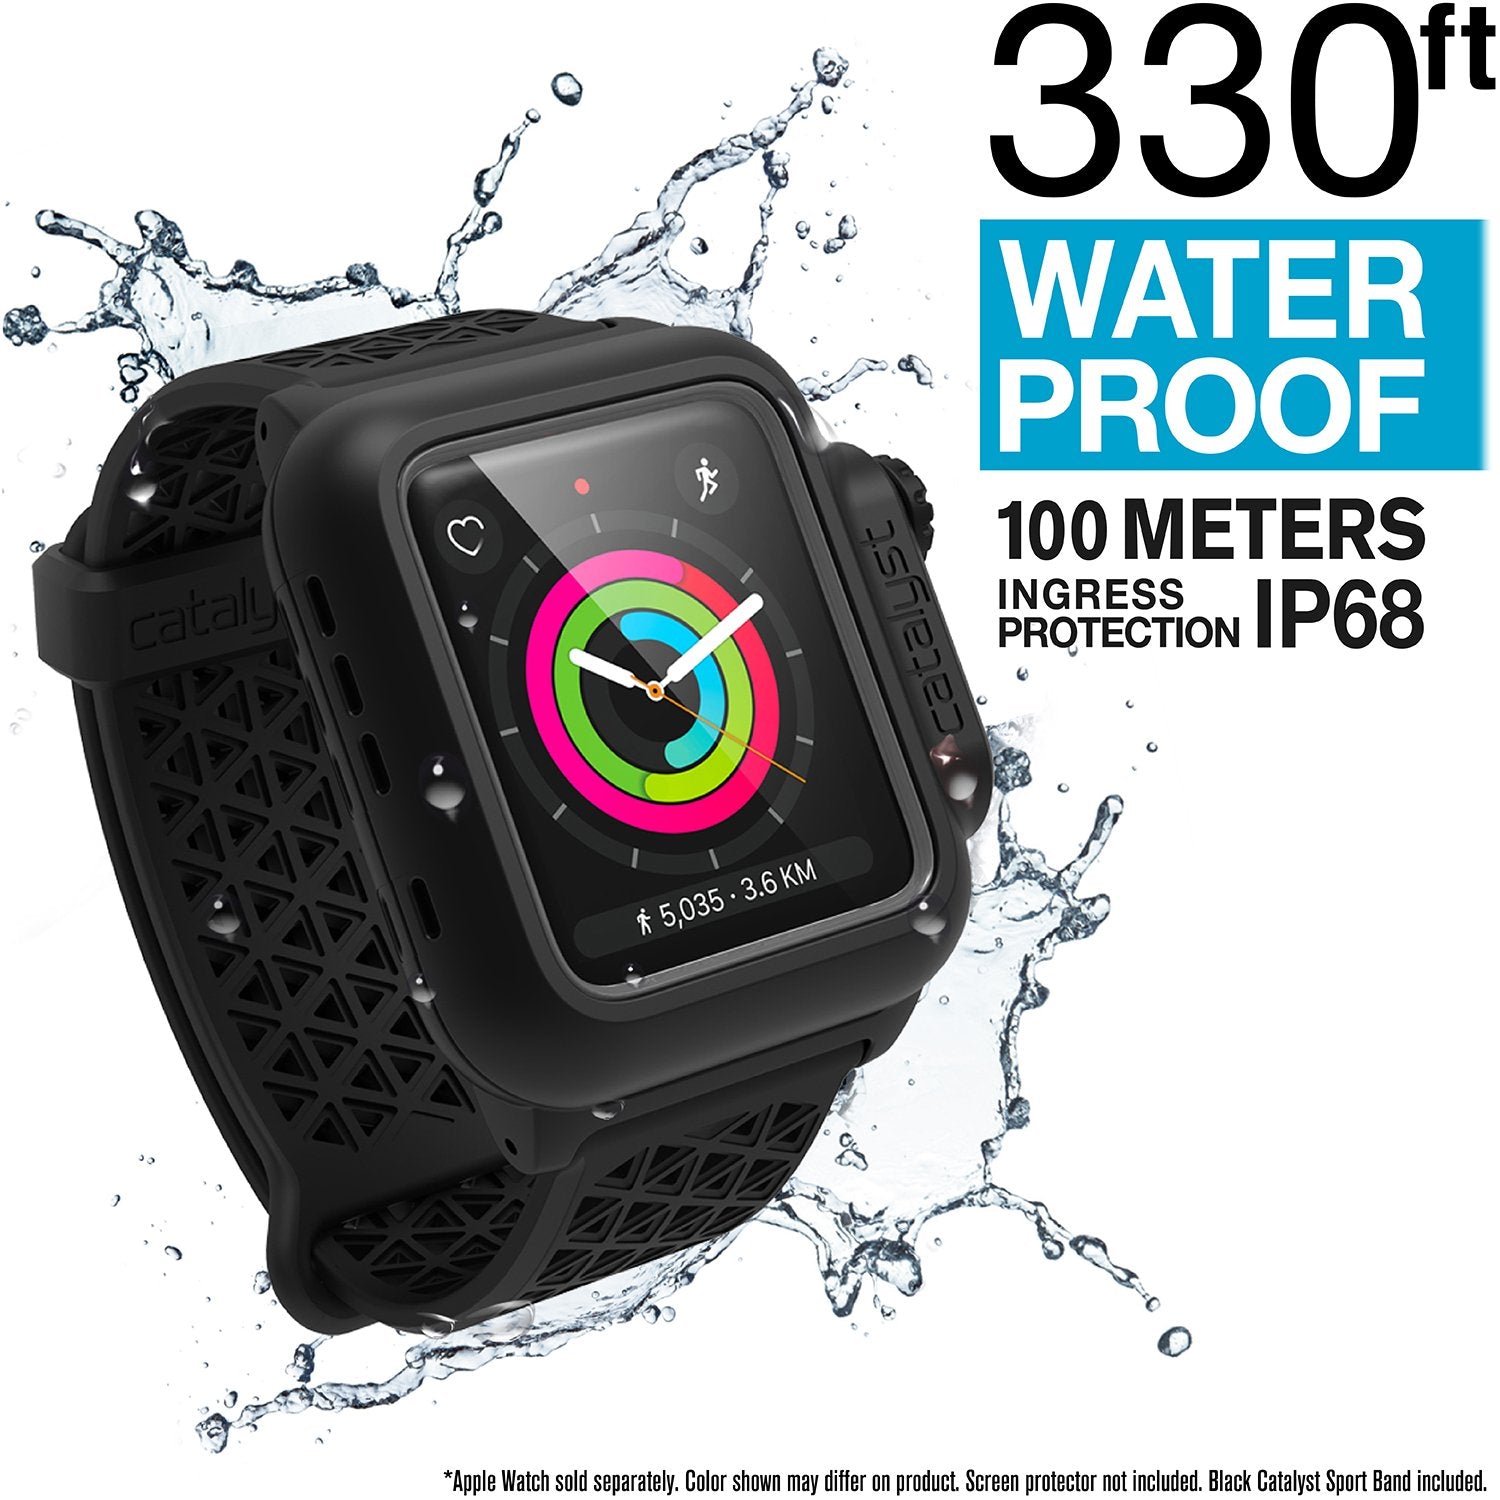 Waterproof Cases for Apple Watch Series 3 42MM | Catalyst Lifestyle